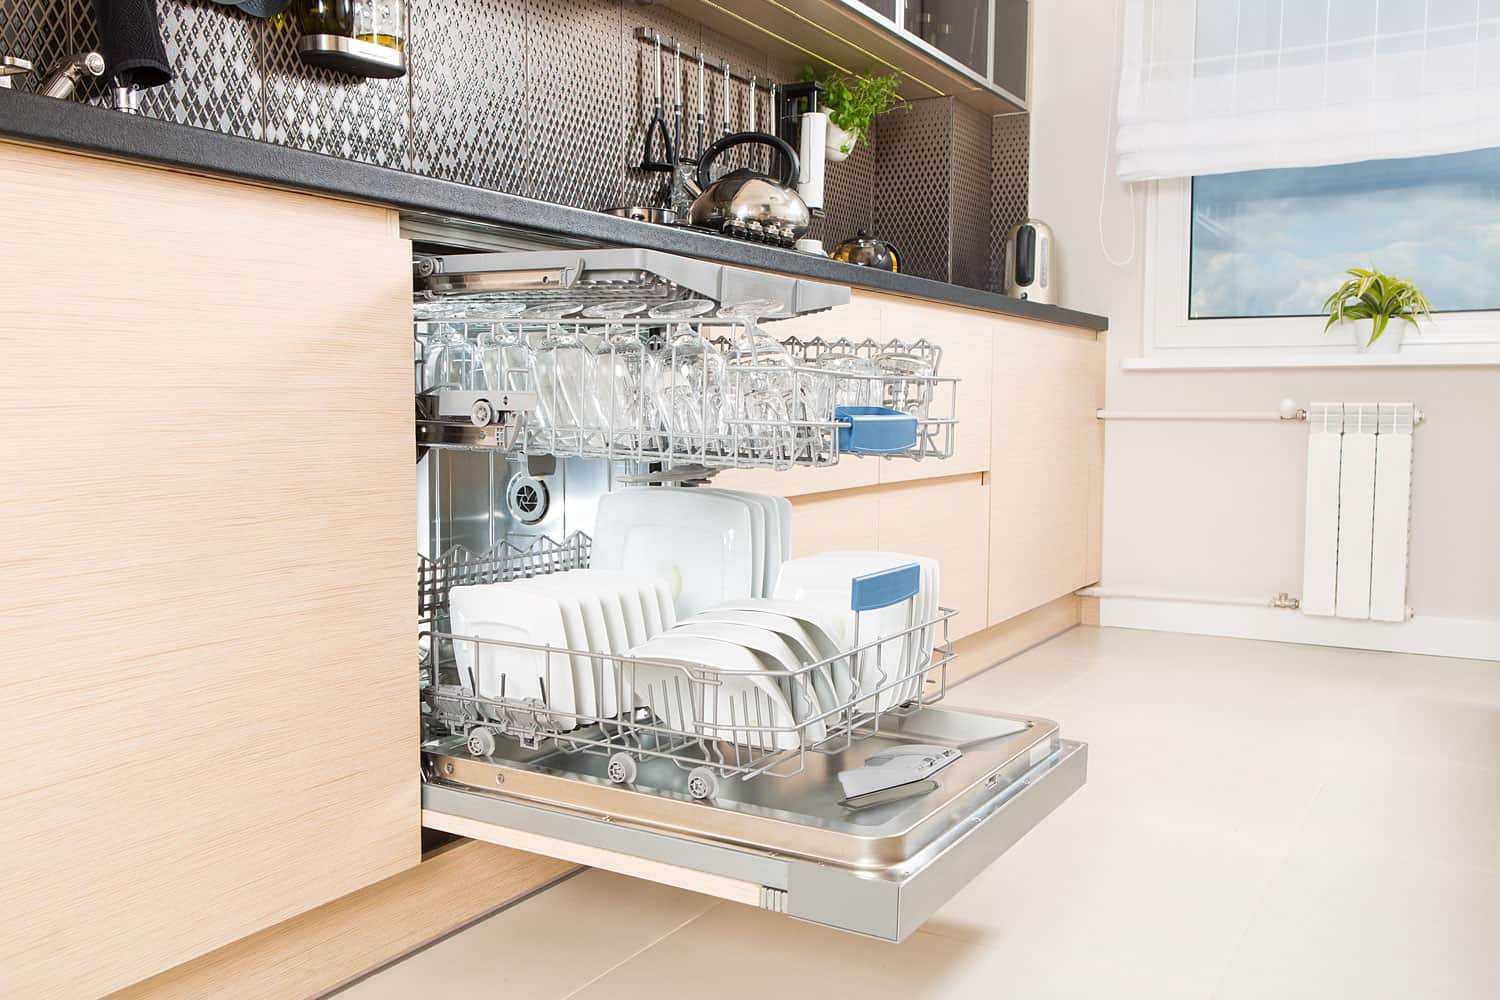 A dishwashing rack with plates and glass on it